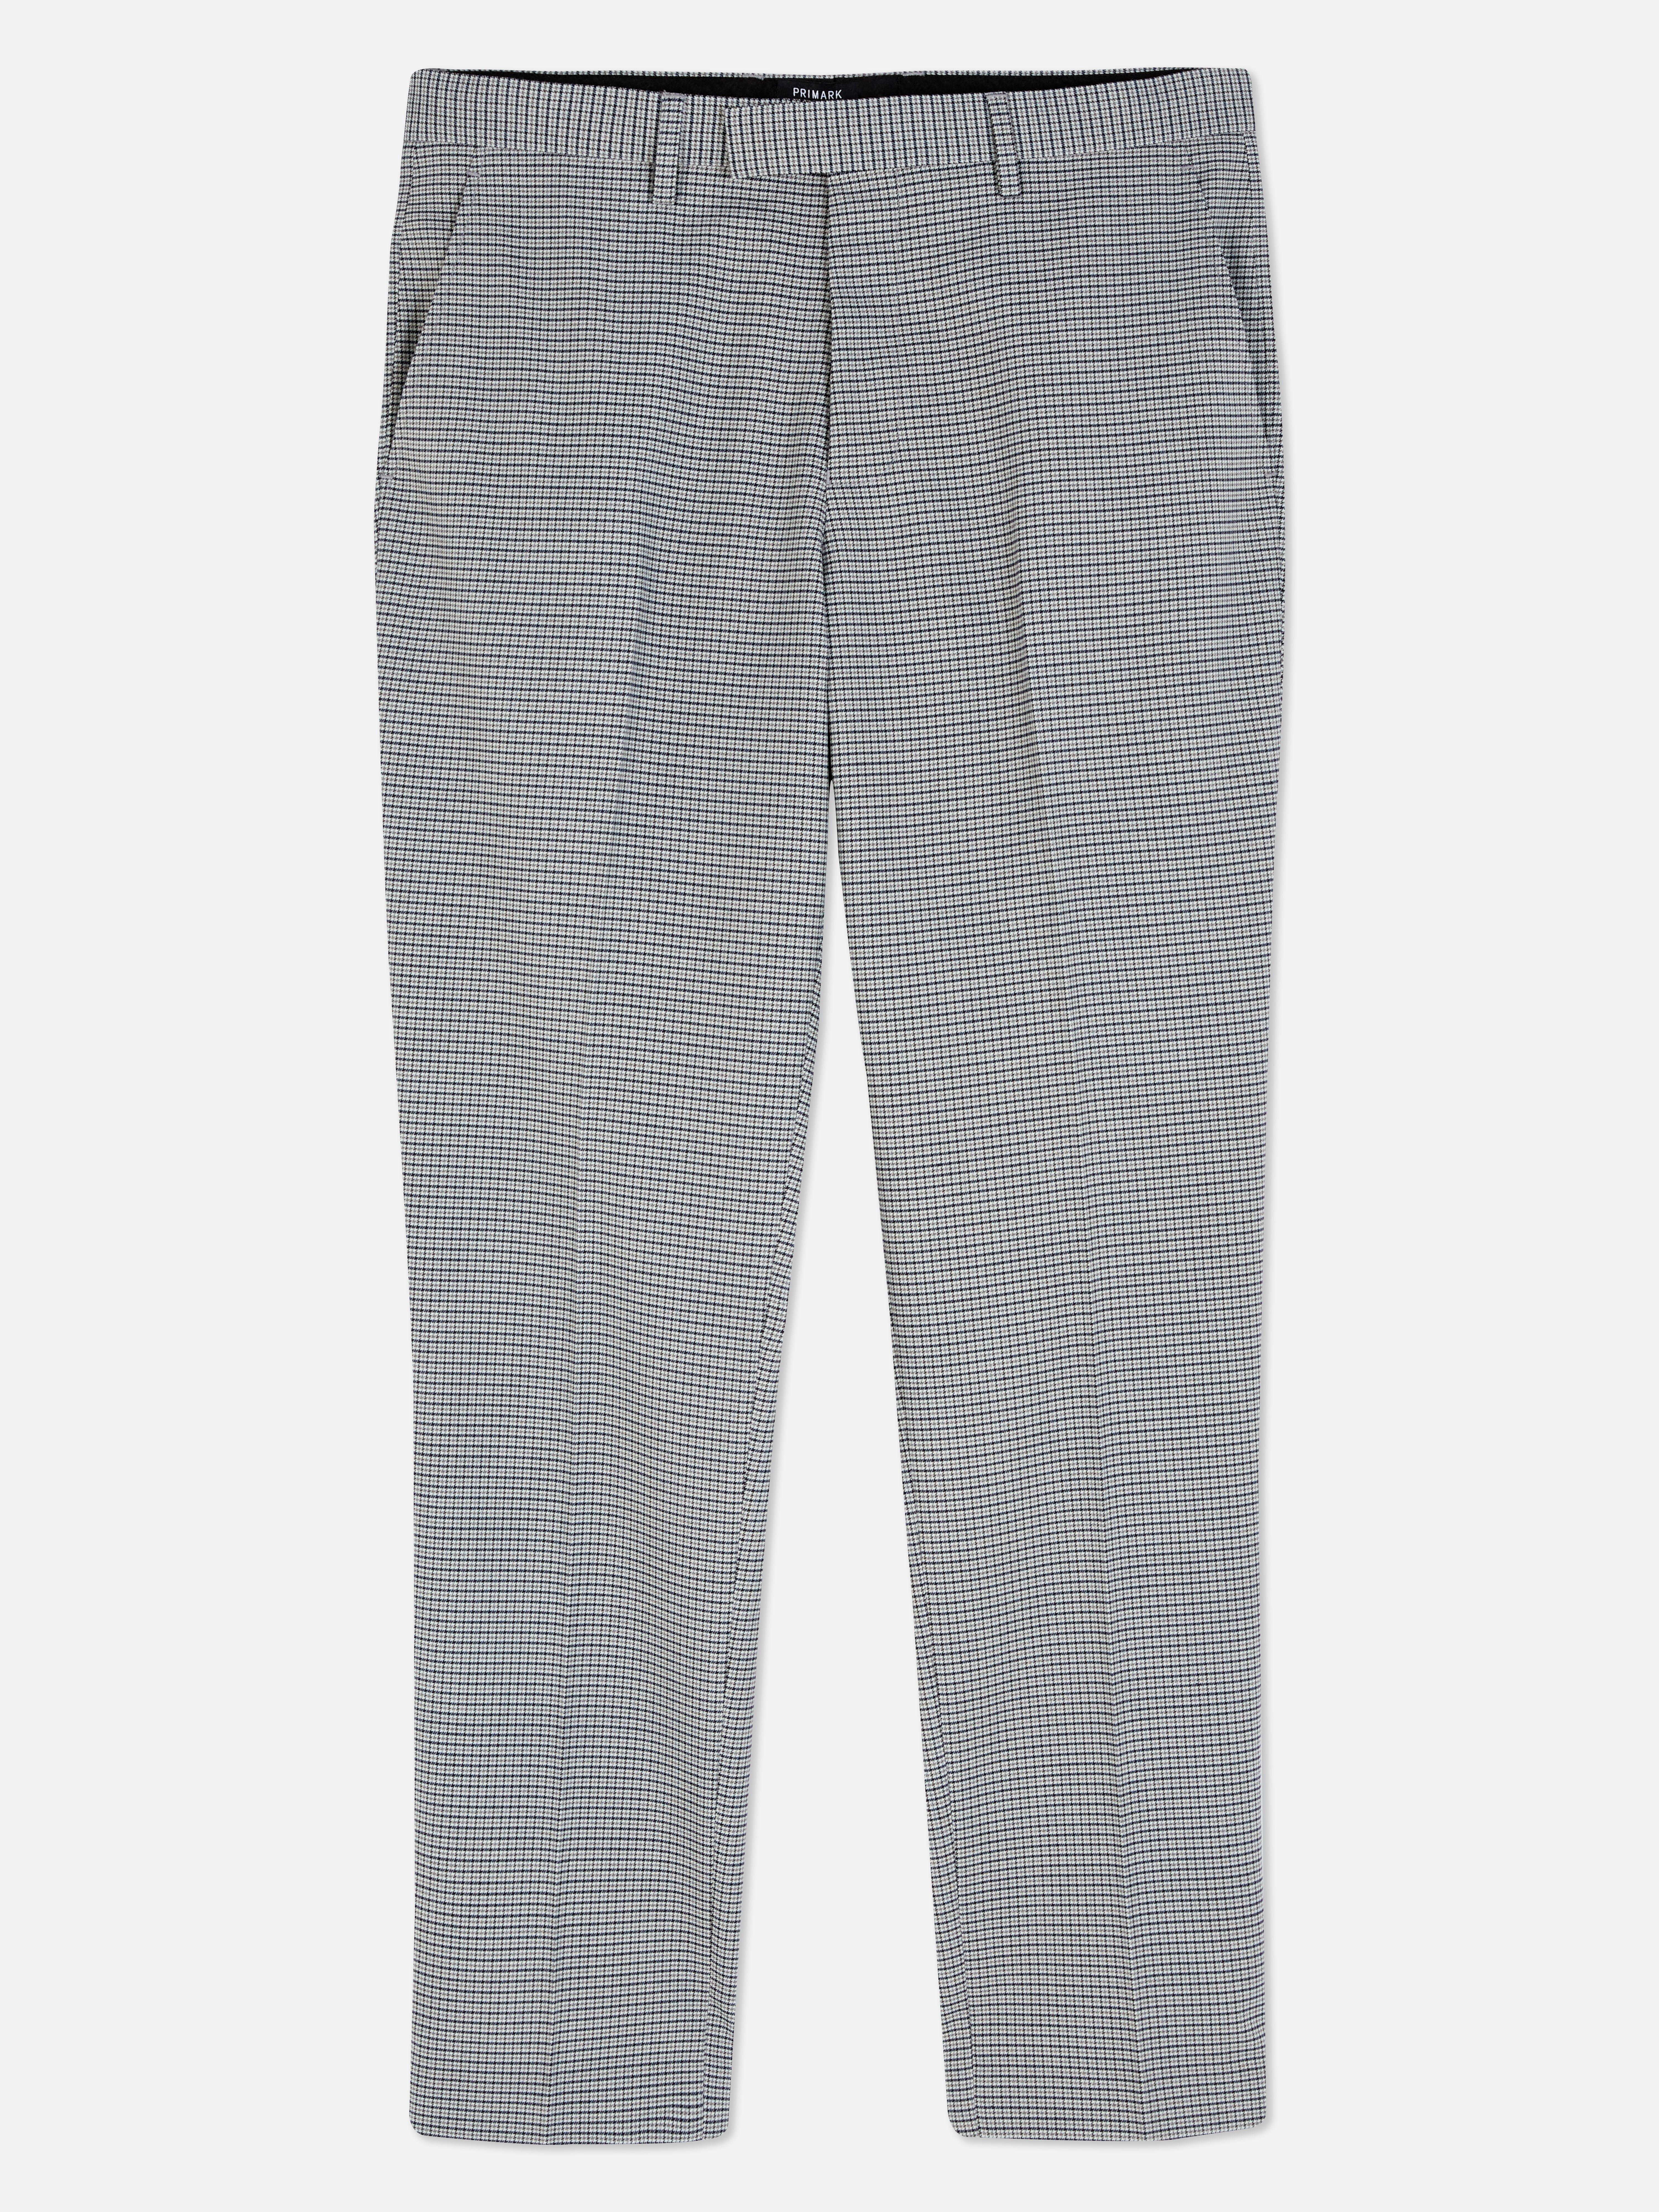 Dogtooth Tapered Suit Trousers